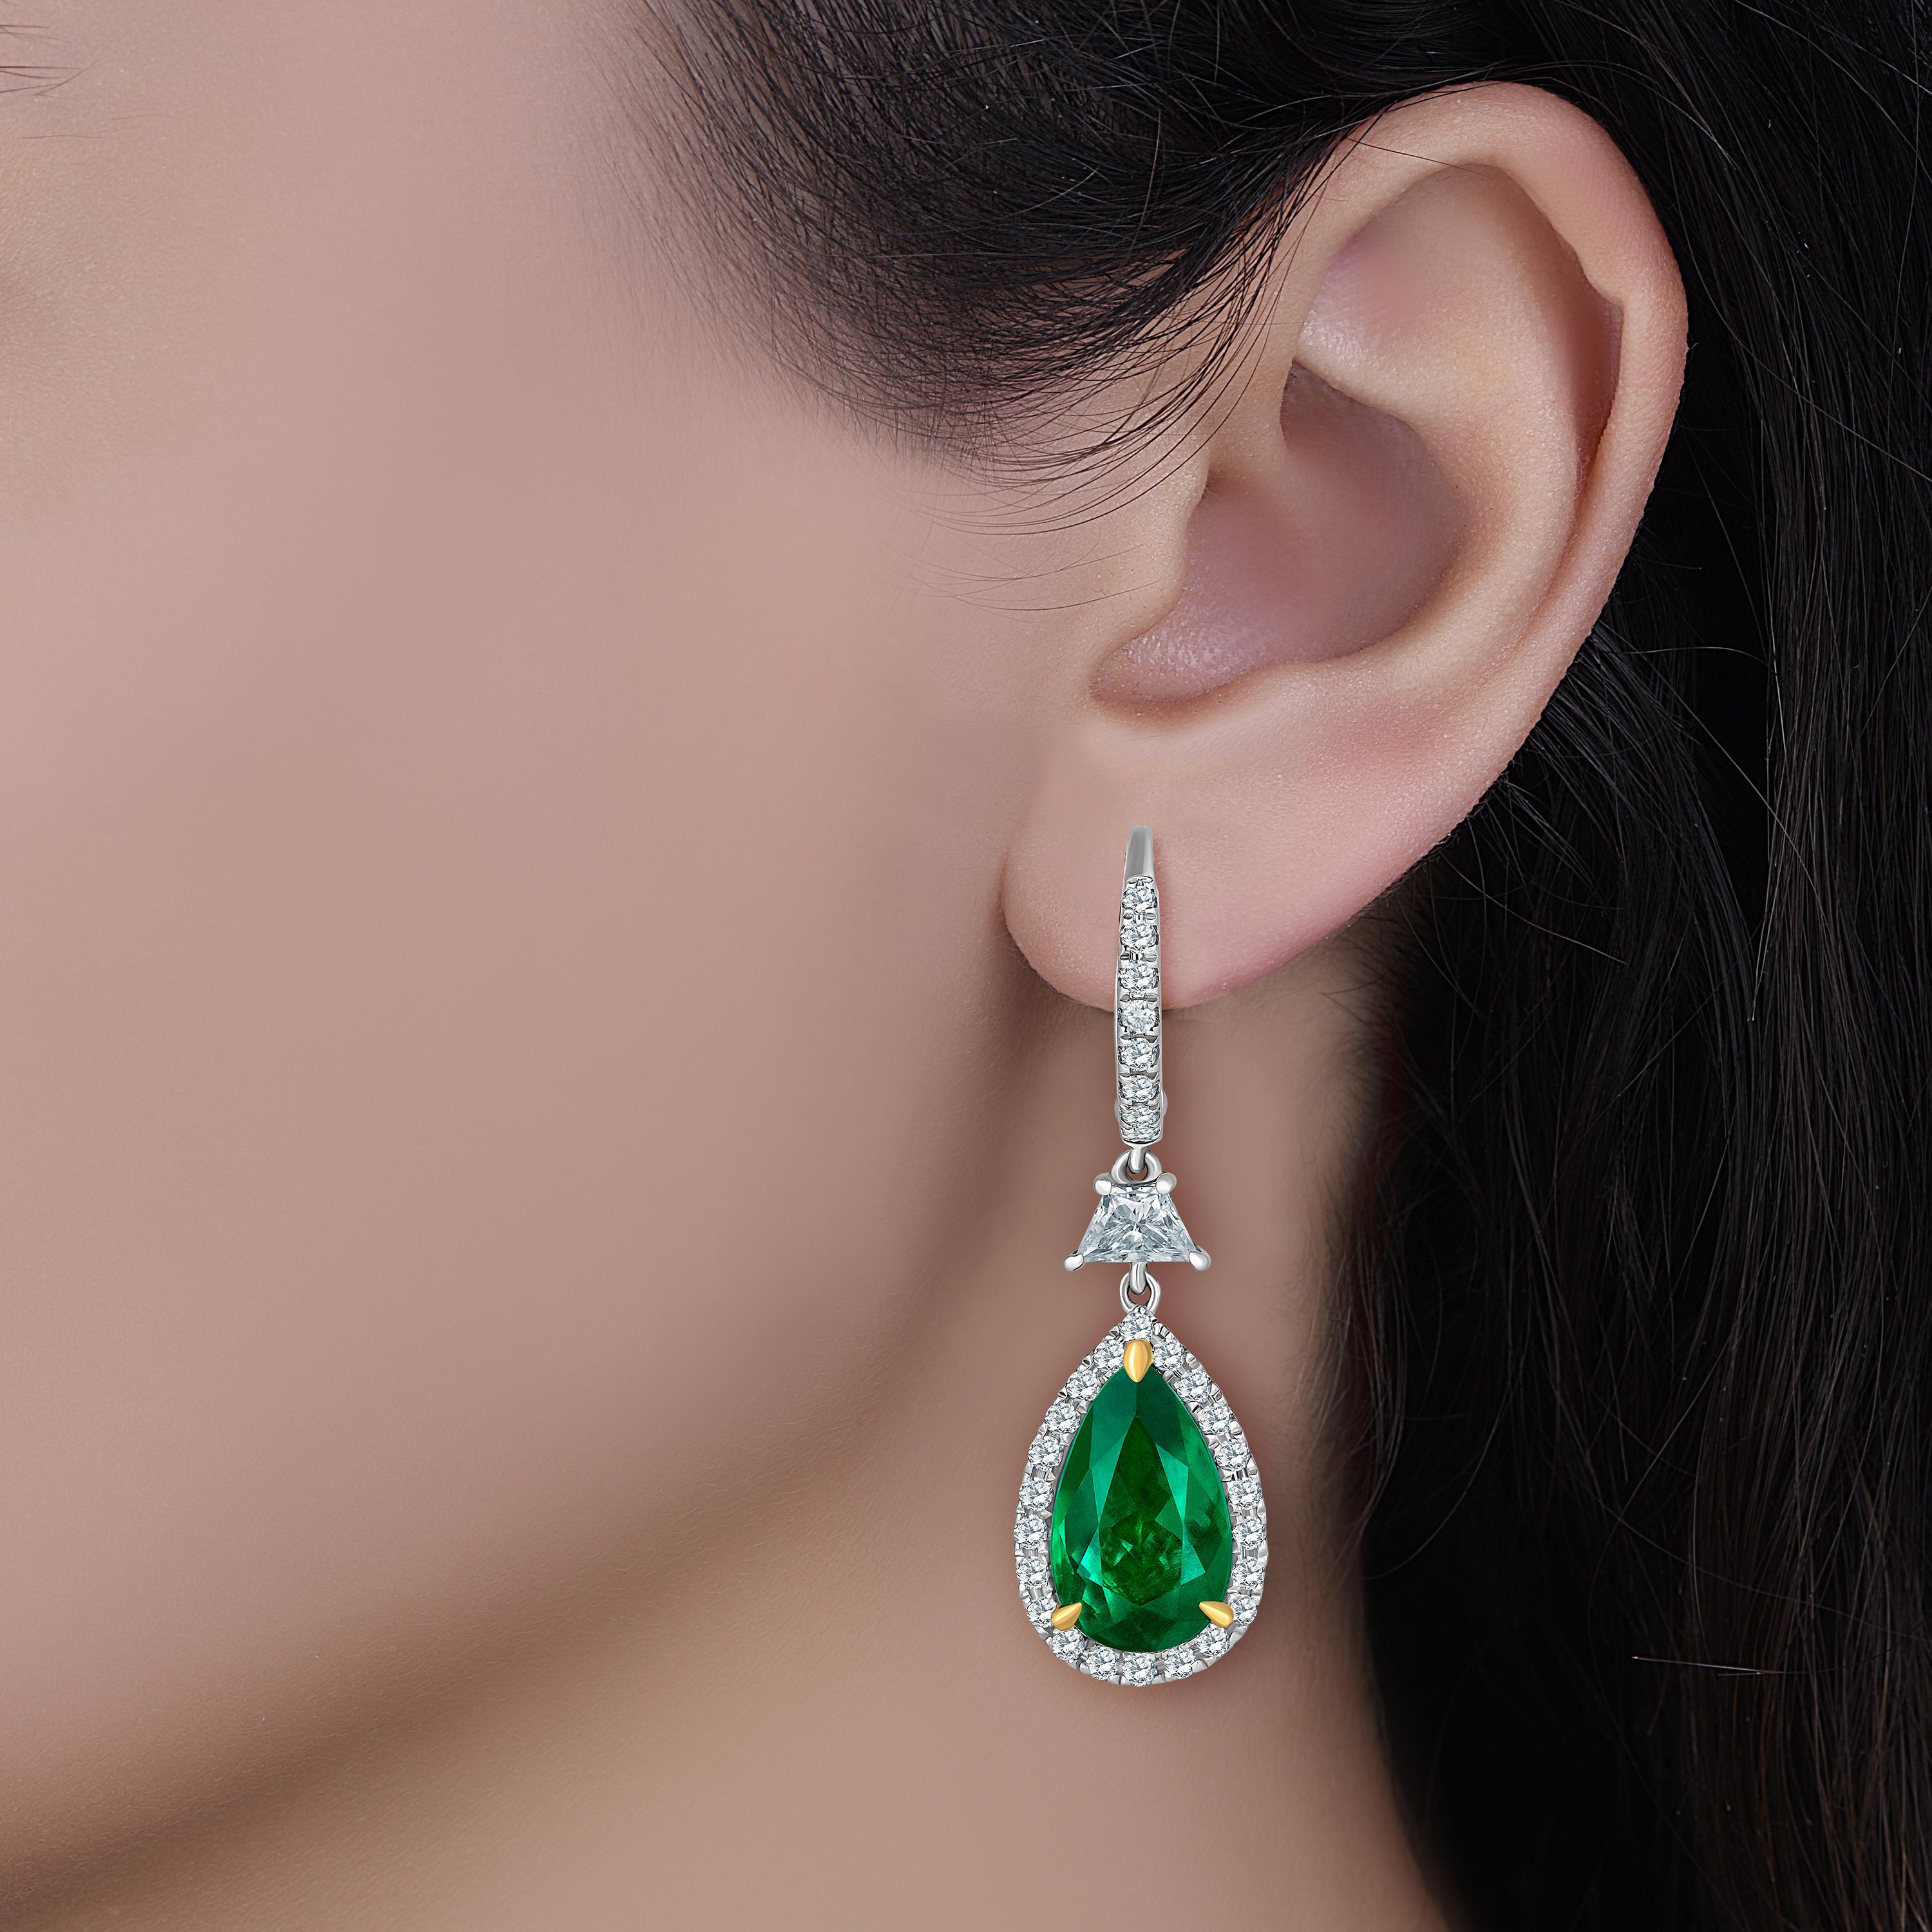 Emilio Jewelry Certified 6.70 Carat Vivid Green Colombian Emerald Earrings
Showcasing a gorgeous pear of pear shape Genuine colombian Emeralds weighing 5.45cts Certified by C.Dunaigre. The emerald color is certified as Vivid green, the most